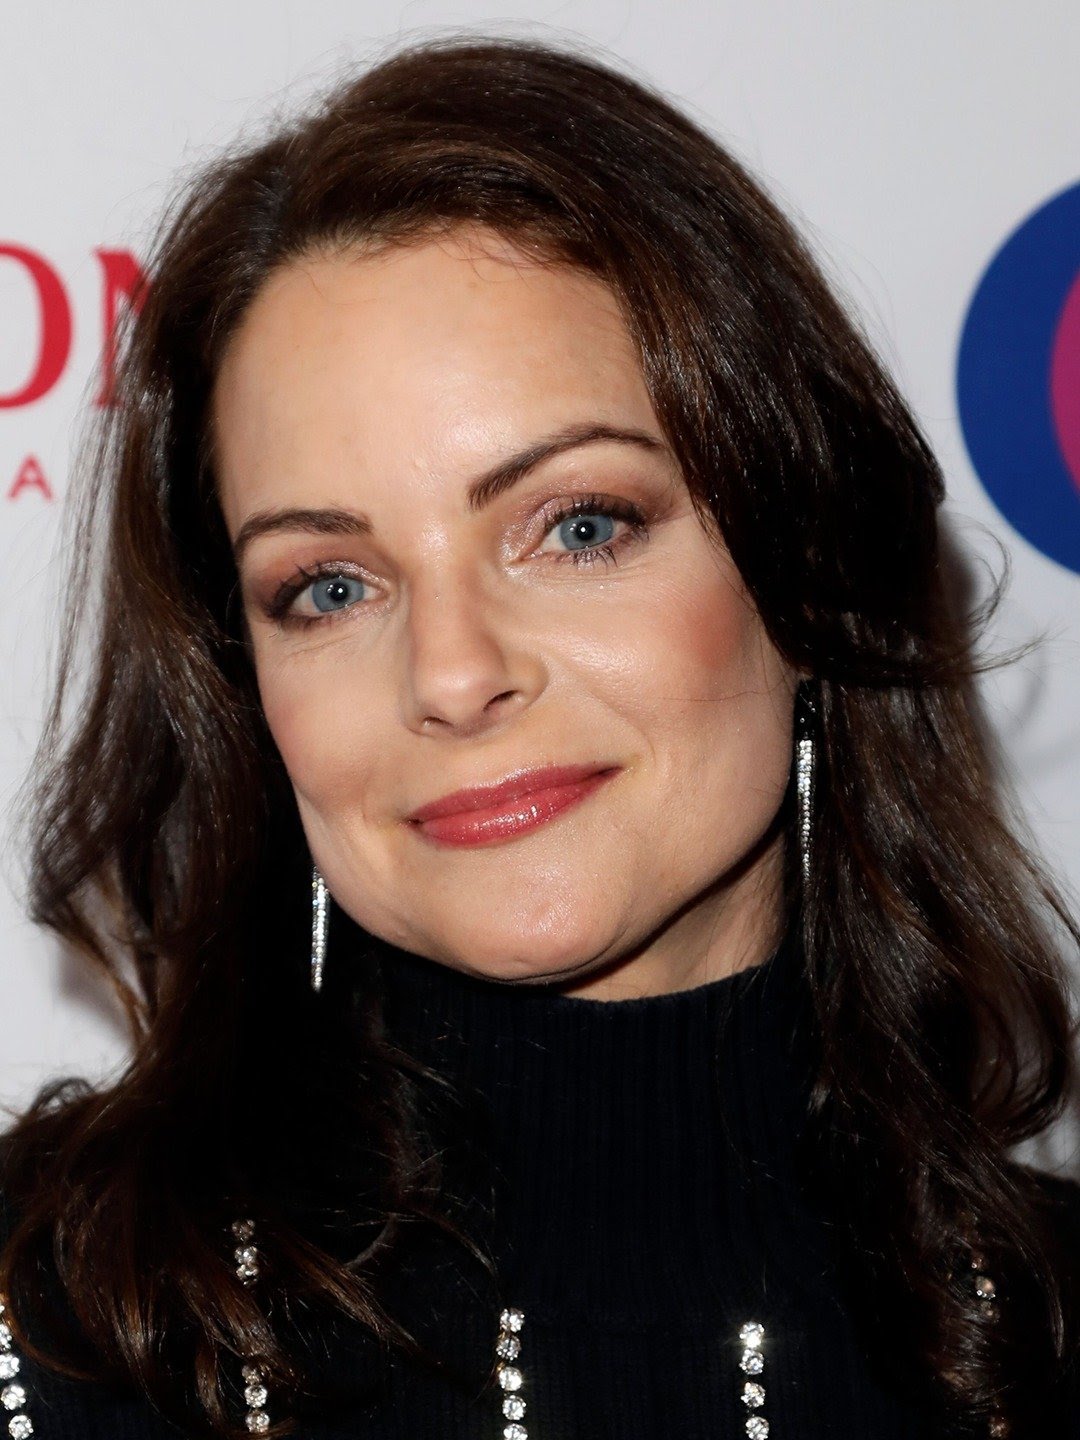 Kimberly Williams-Paisley: The Wife, Actress, and Author of Brad Paisley